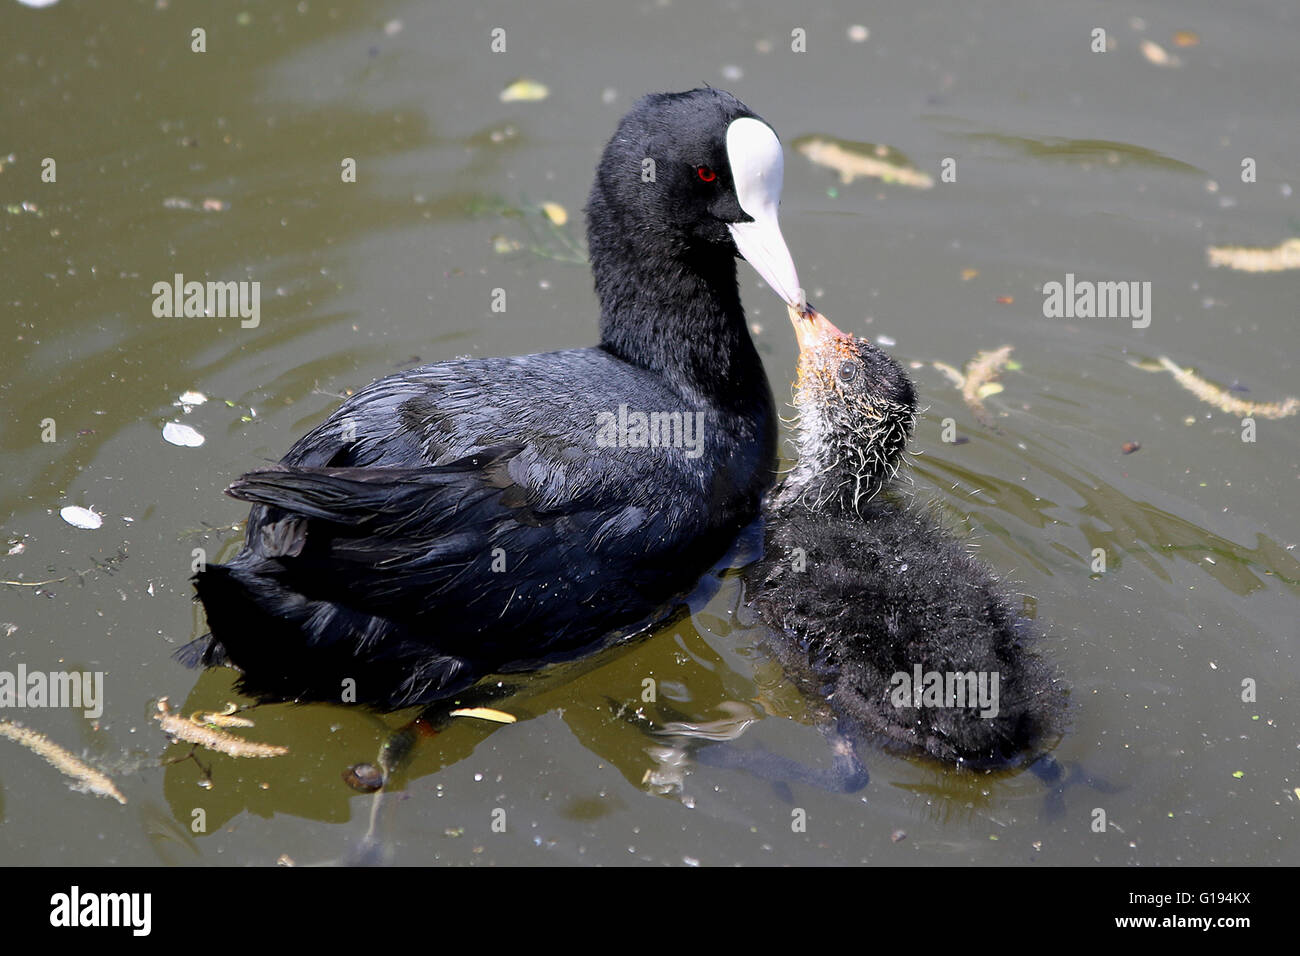 A coot with her chick taken on the Limehouse Cut canal, near Stratford, London Stock Photo